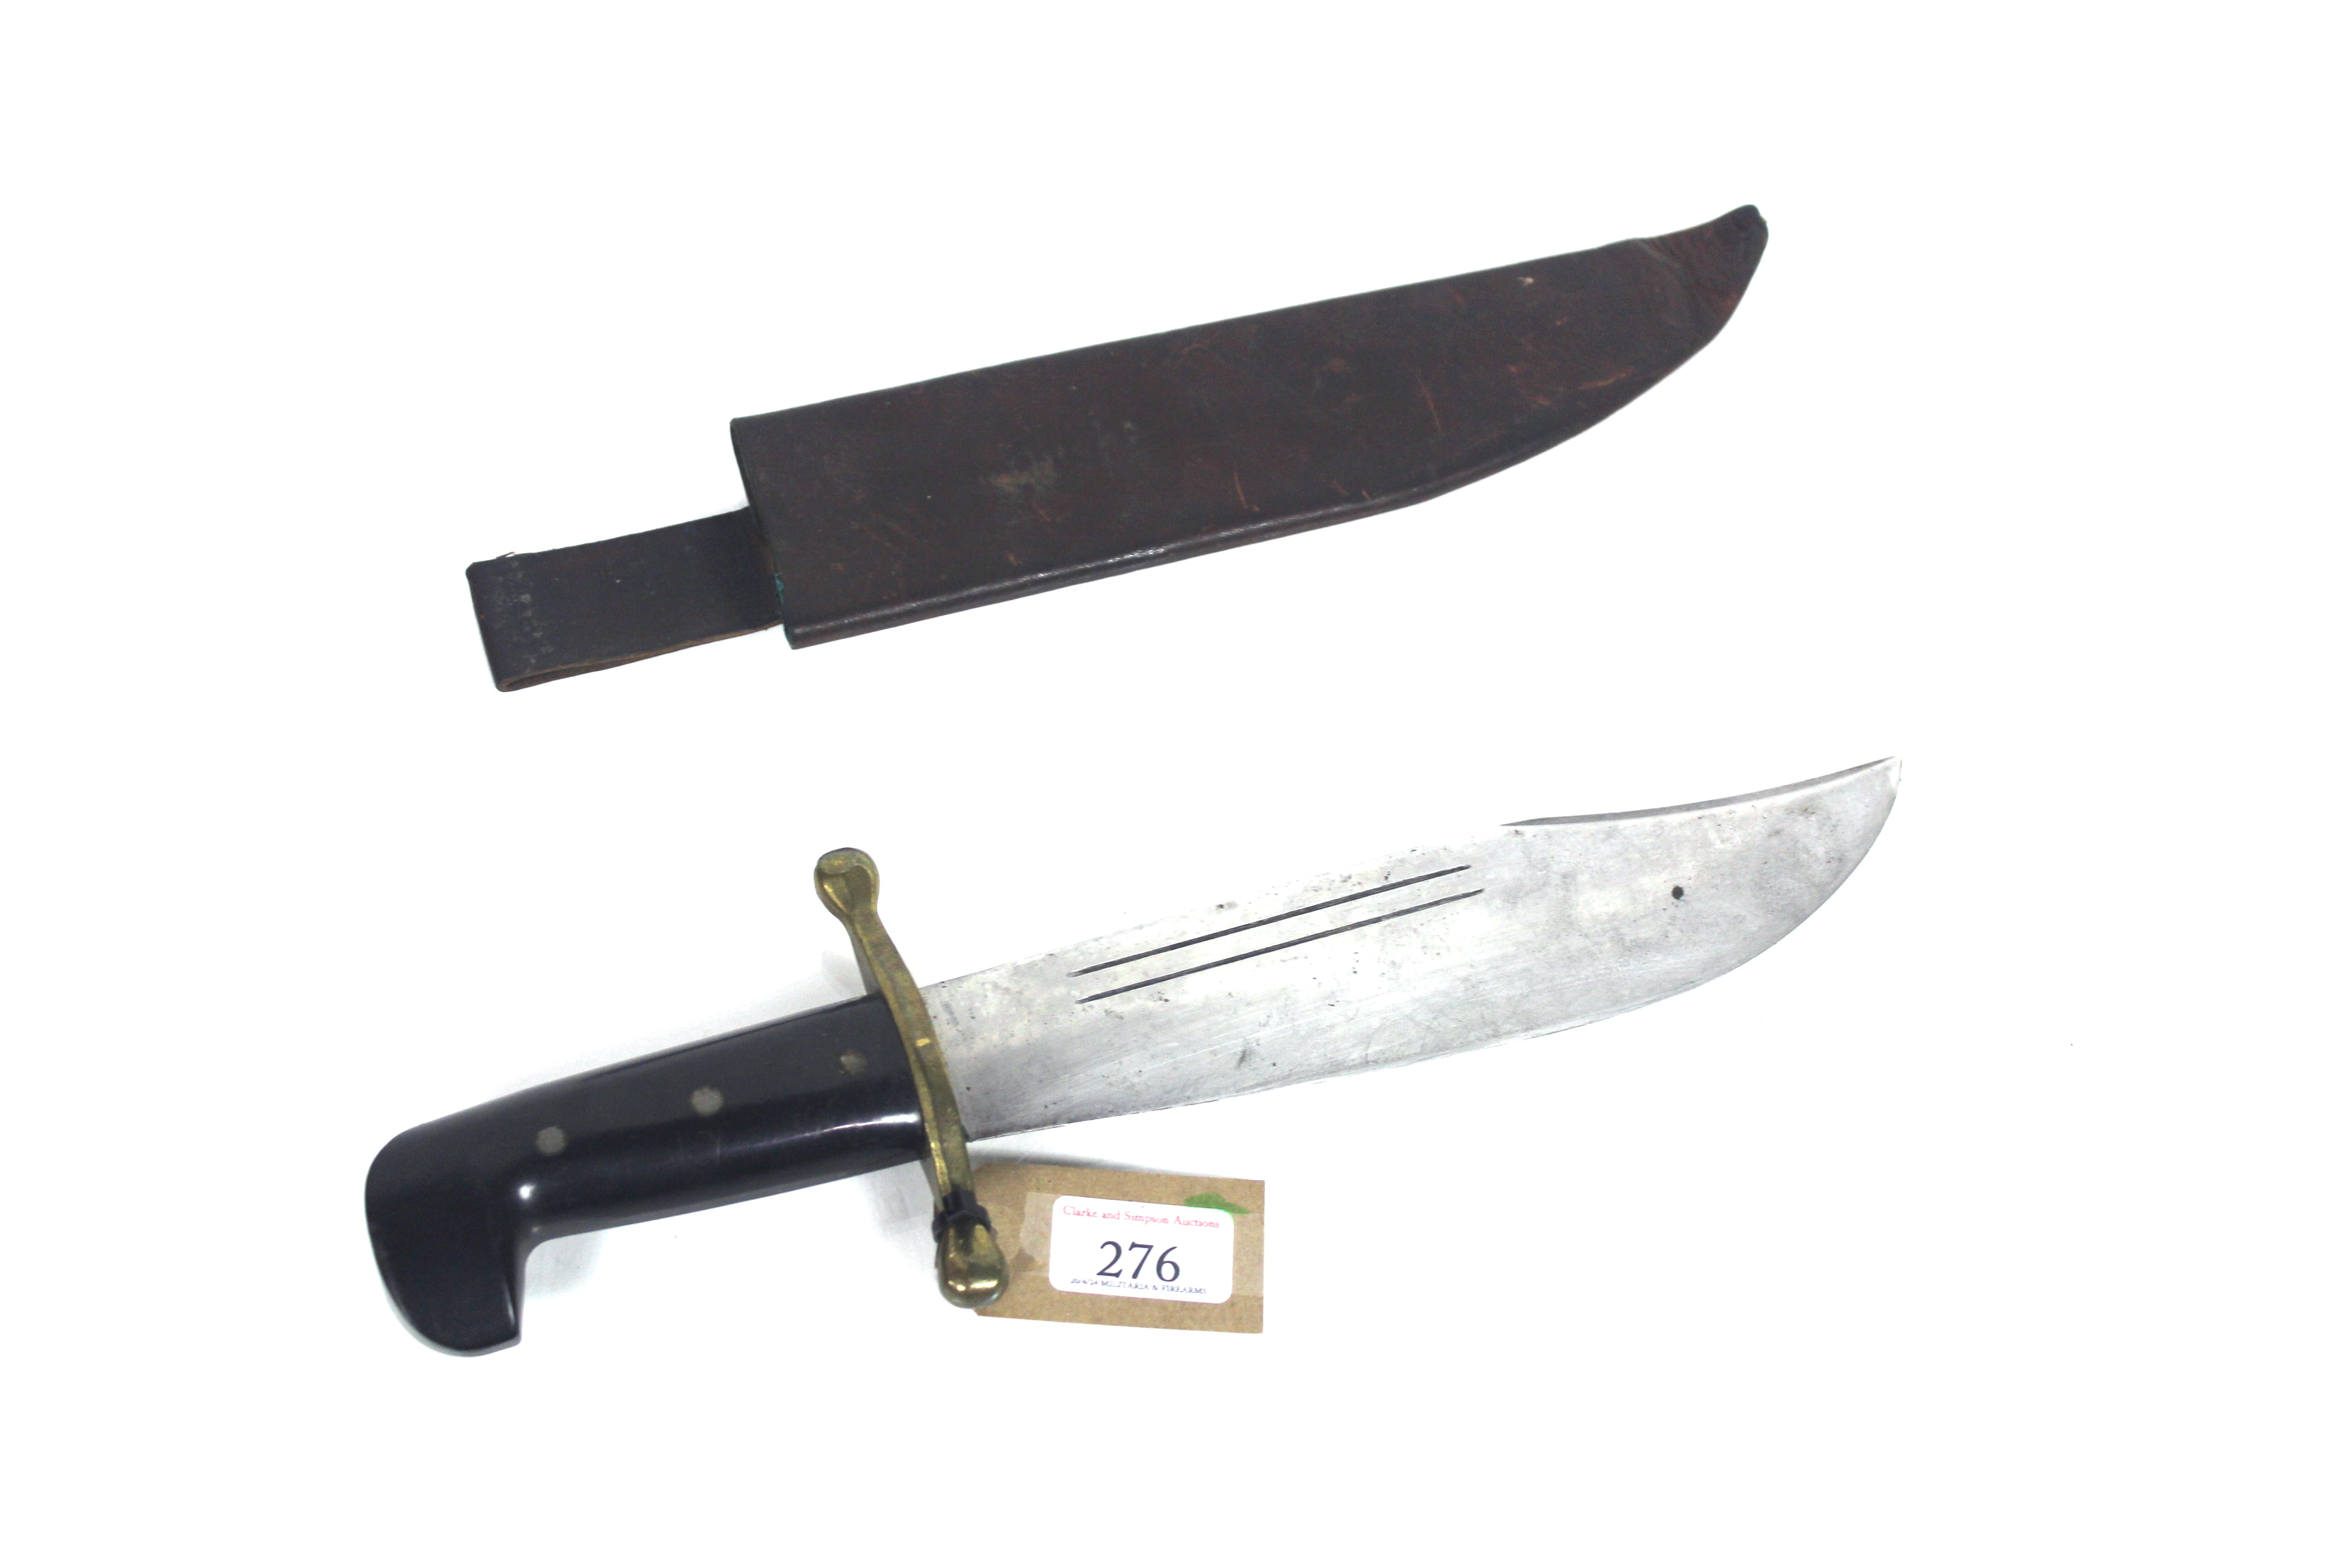 A WWII era V-44 Survival Bowie knife by Case Cutle